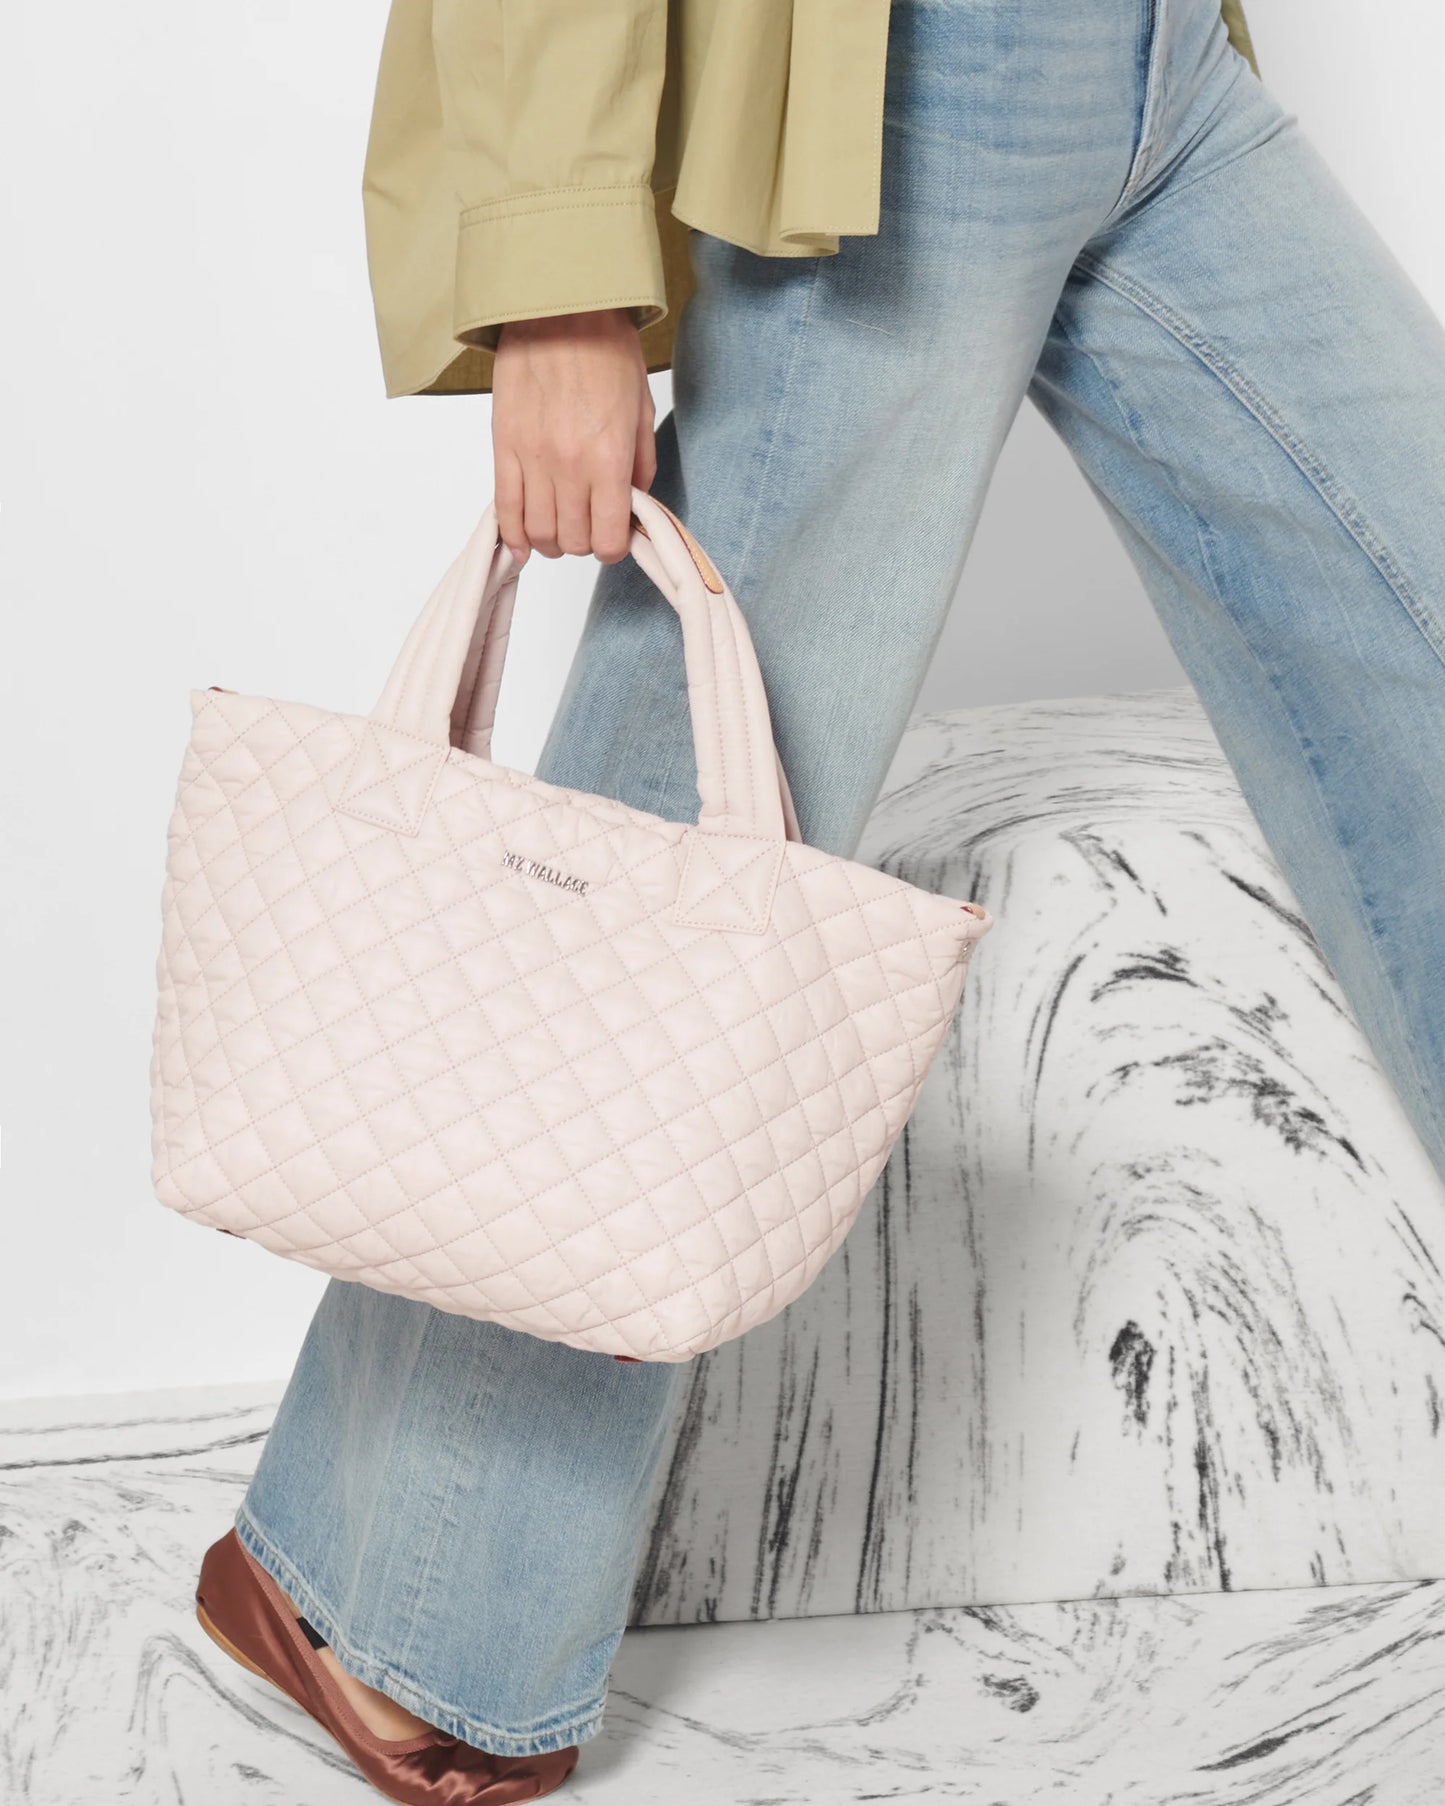 MZ WALLACE SMALL METRO TOTE DELUXE IN ROSE